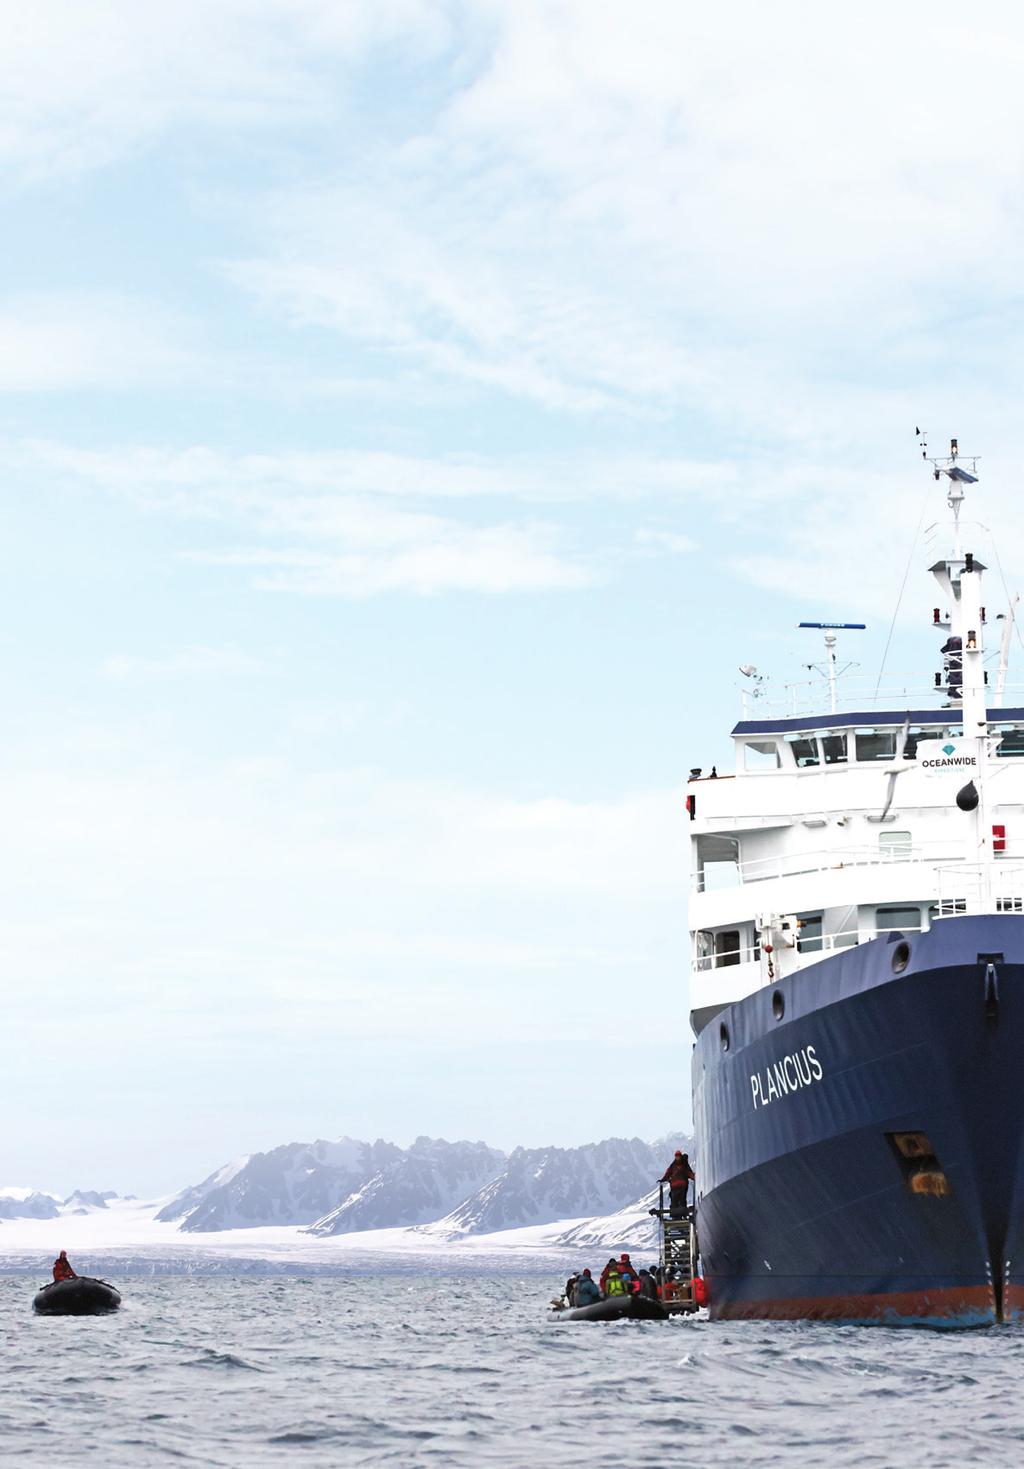 WHY US? WE ARE PIONEERS OF SHIP-BASED EXPLORATO- RY VOYAGES IN THE ARCTIC AND ANTARCTICA.